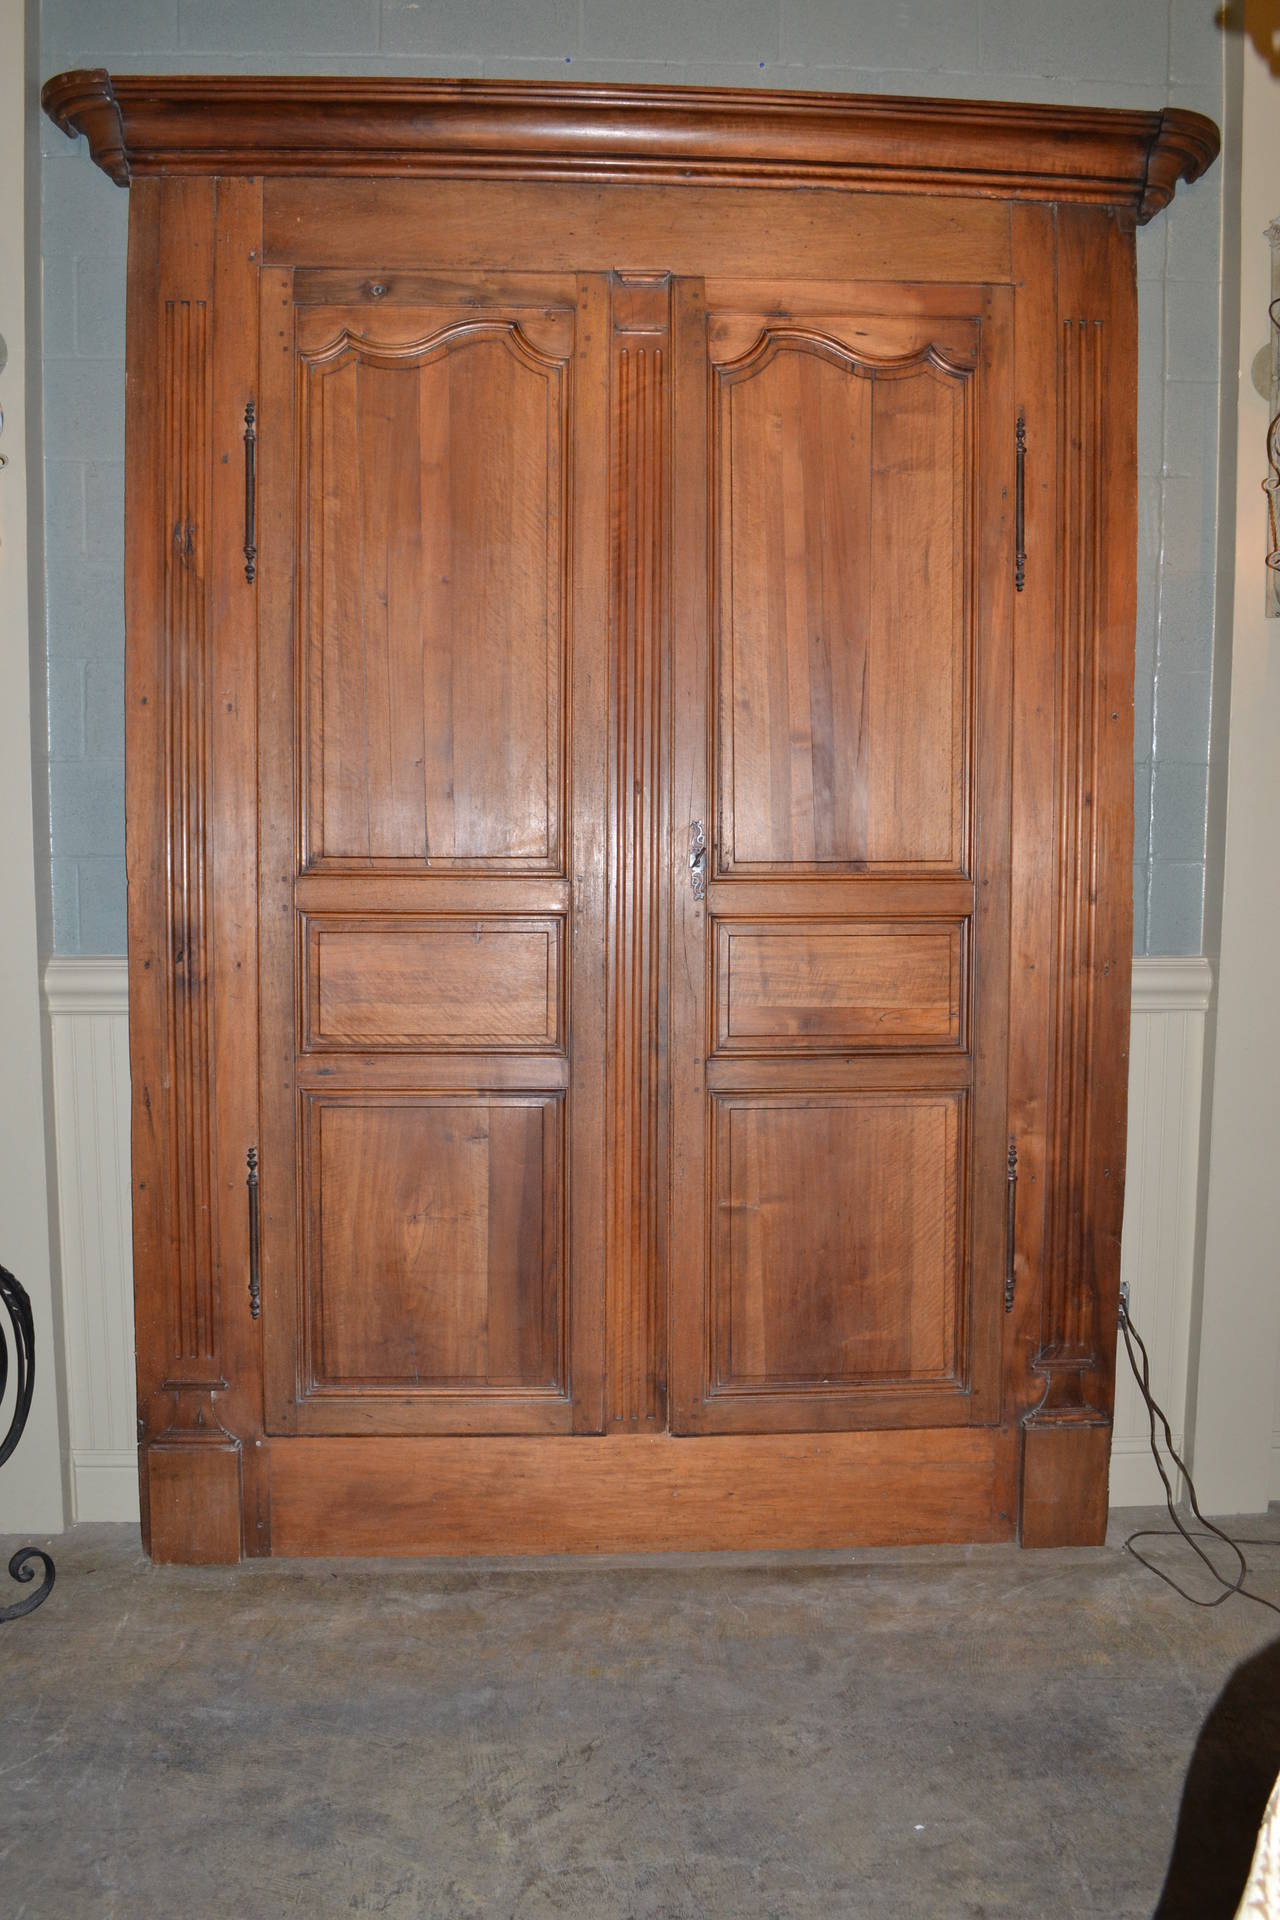 A pair of very tall armoire doors that include frame and crown.

Hinges and lock are original and have a working key.

Slightly raised side columns have fluting.